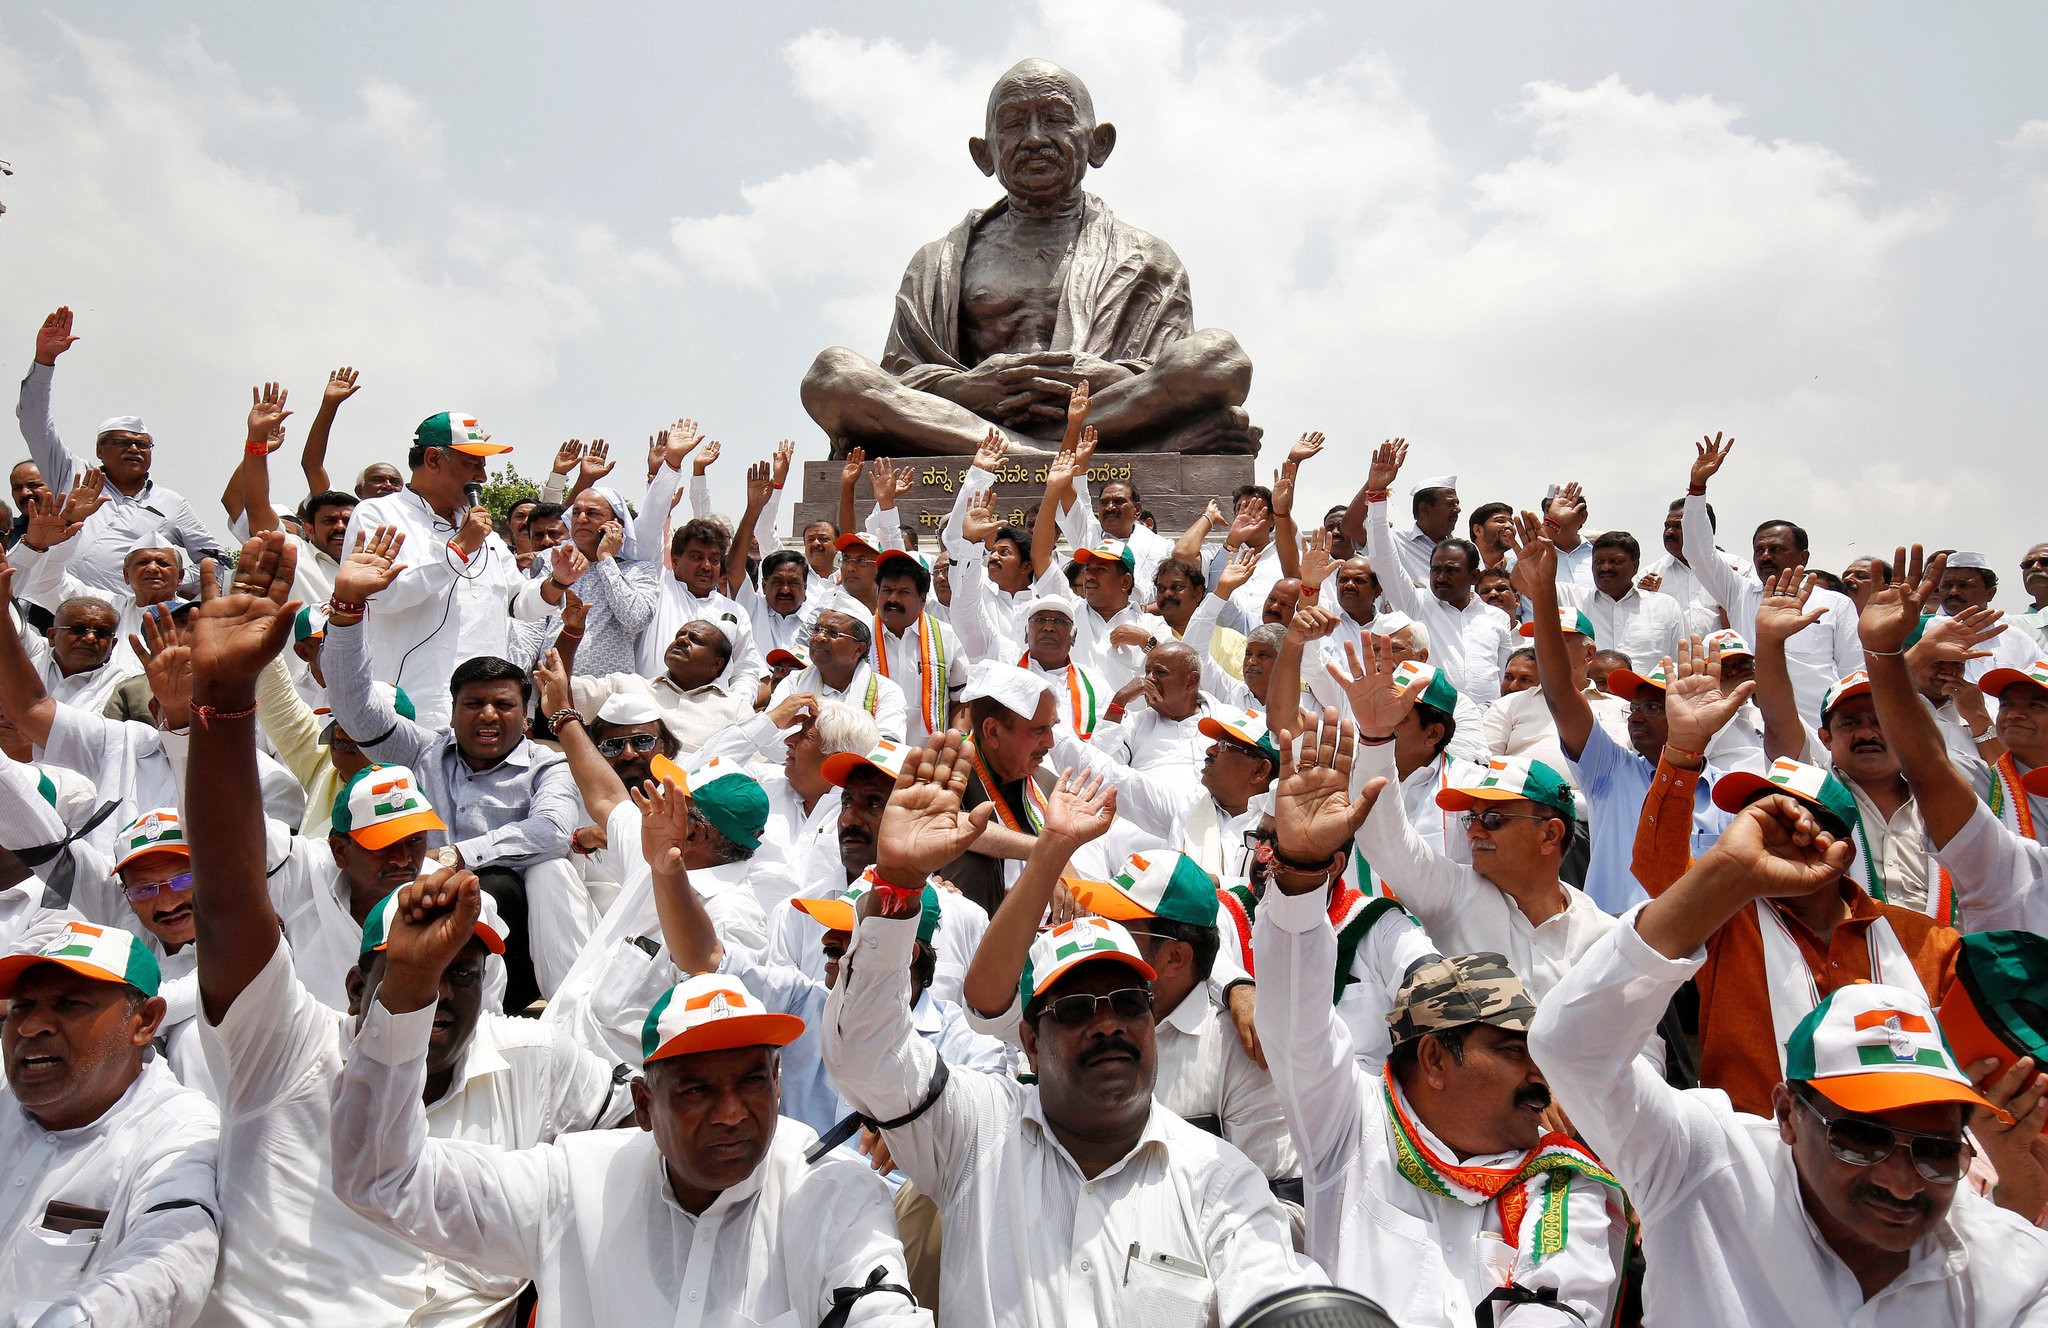 Lawmakers from India's main opposition protests in Bangalore, India in May (photo credit: Abhishek N.Chinnappa/Reuters)